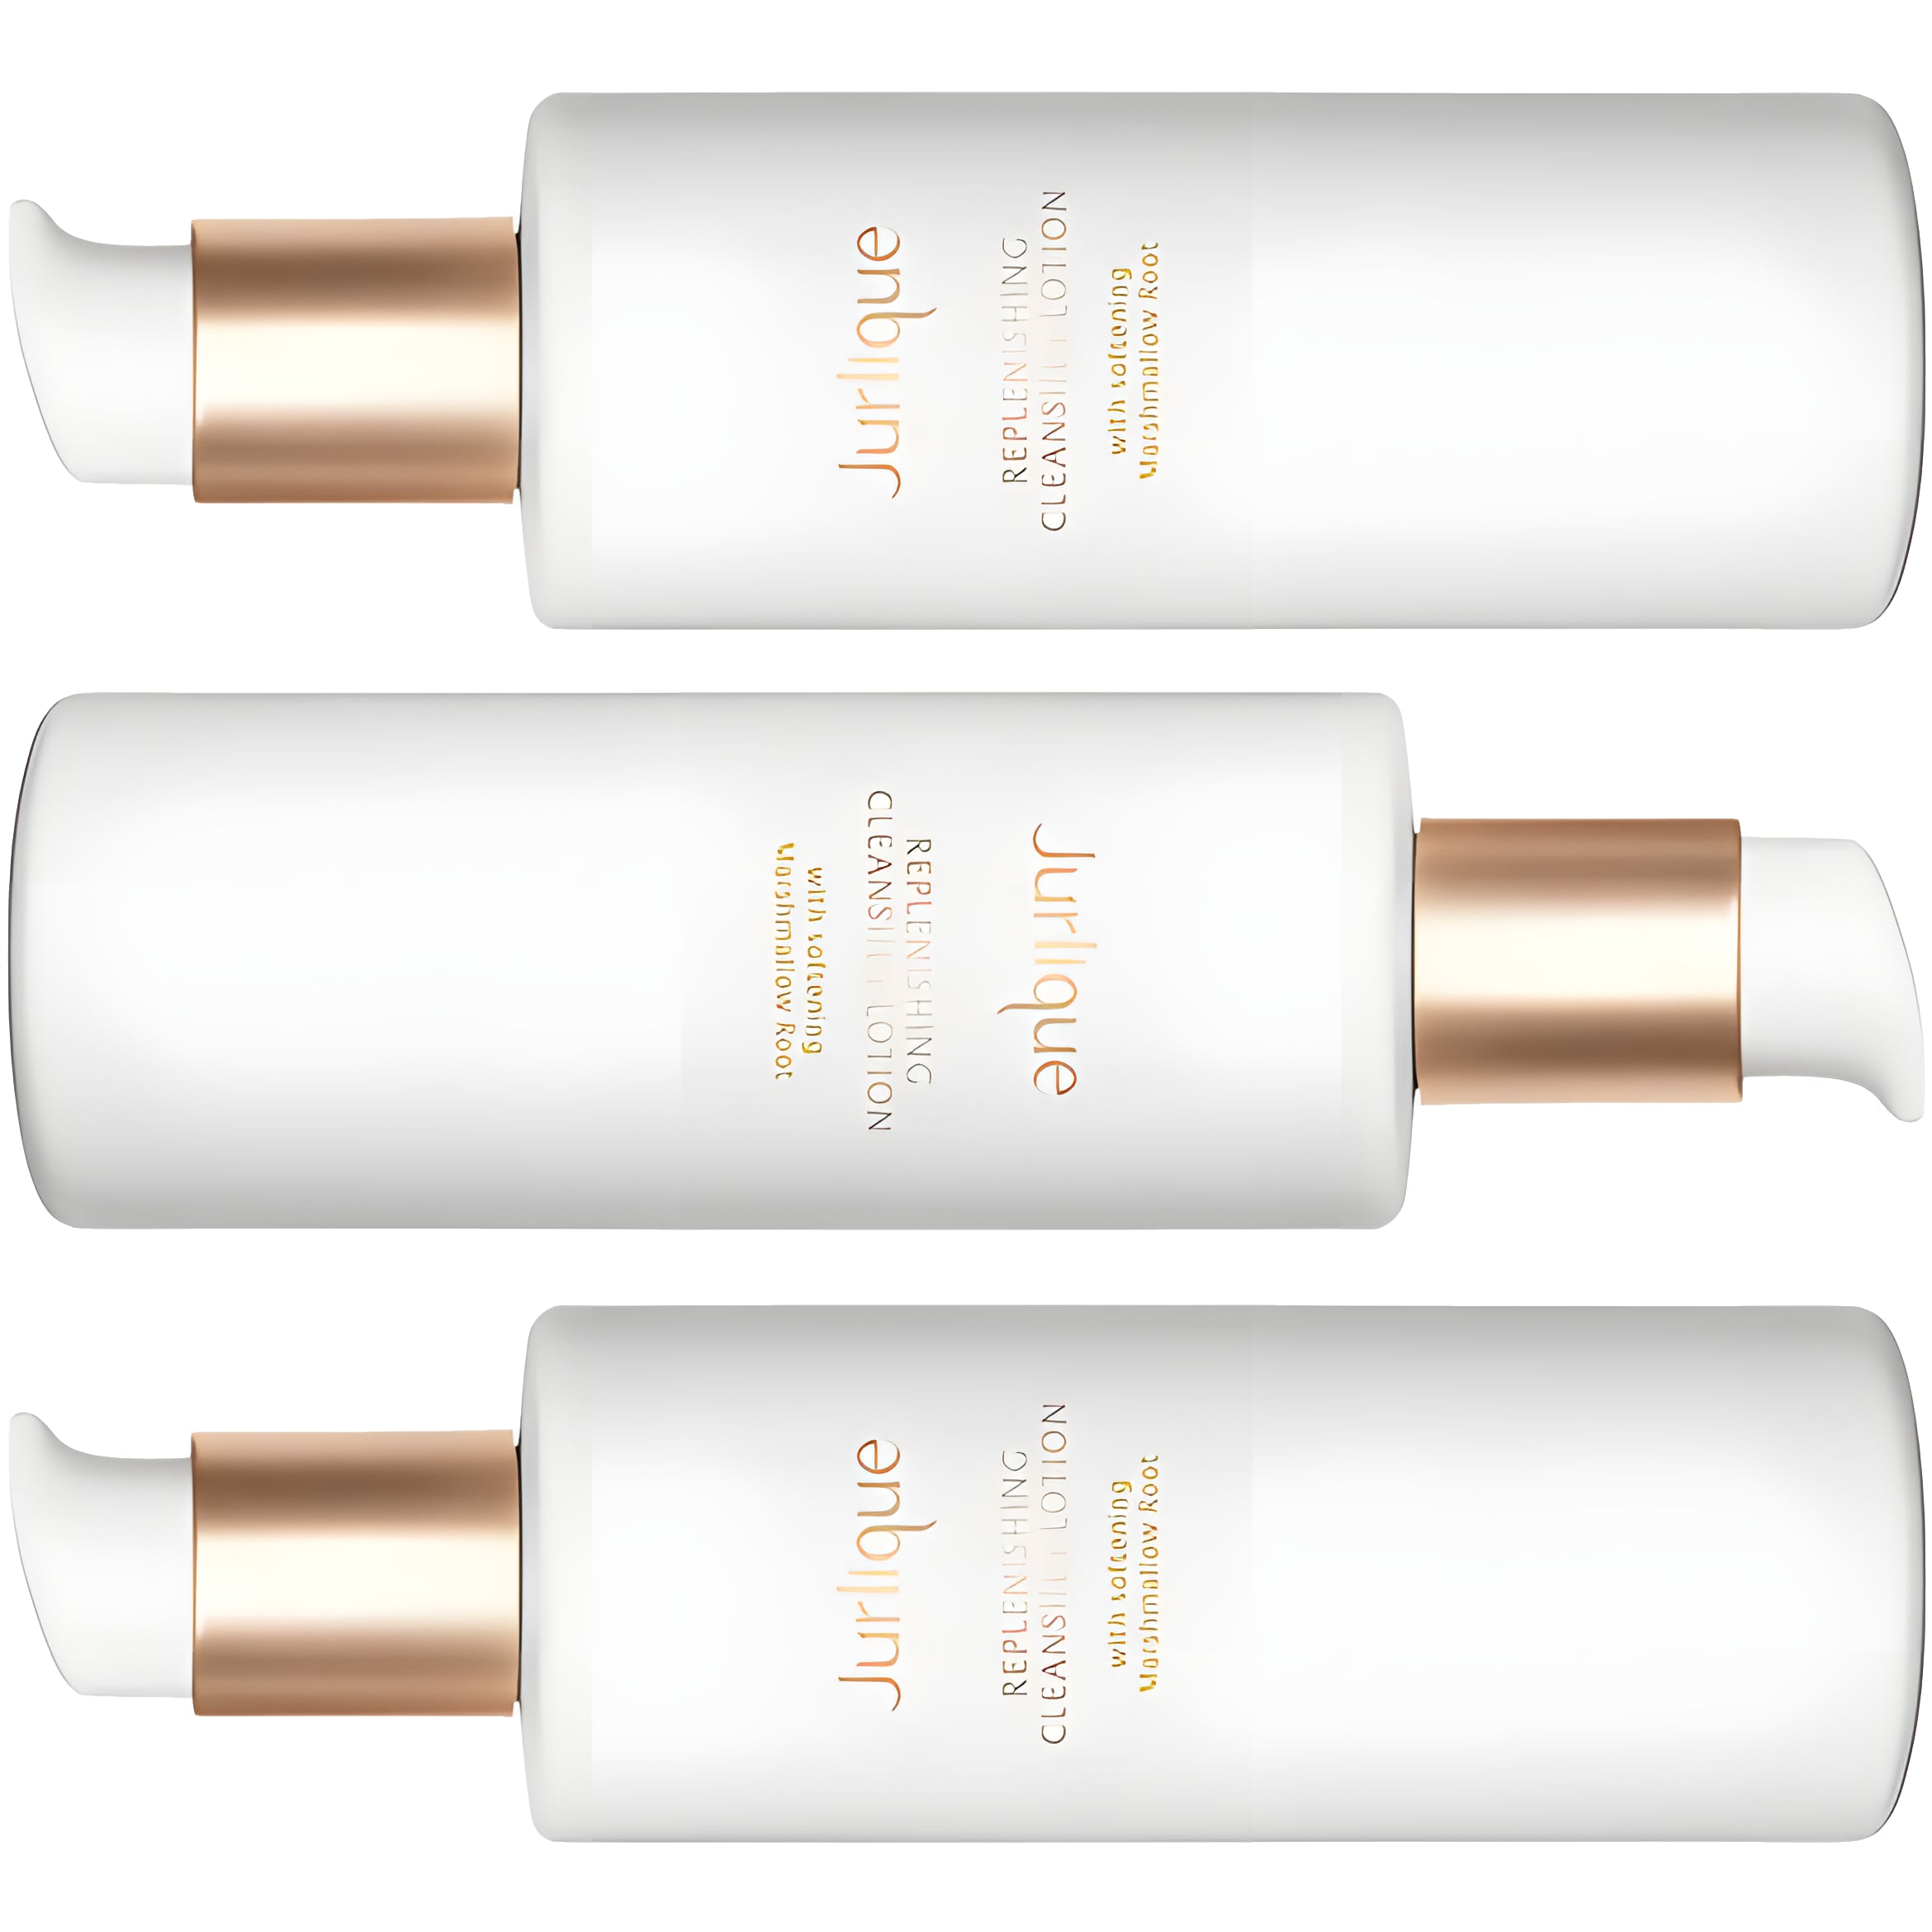 Free Jurlique Replenishing Cleansing Lotion